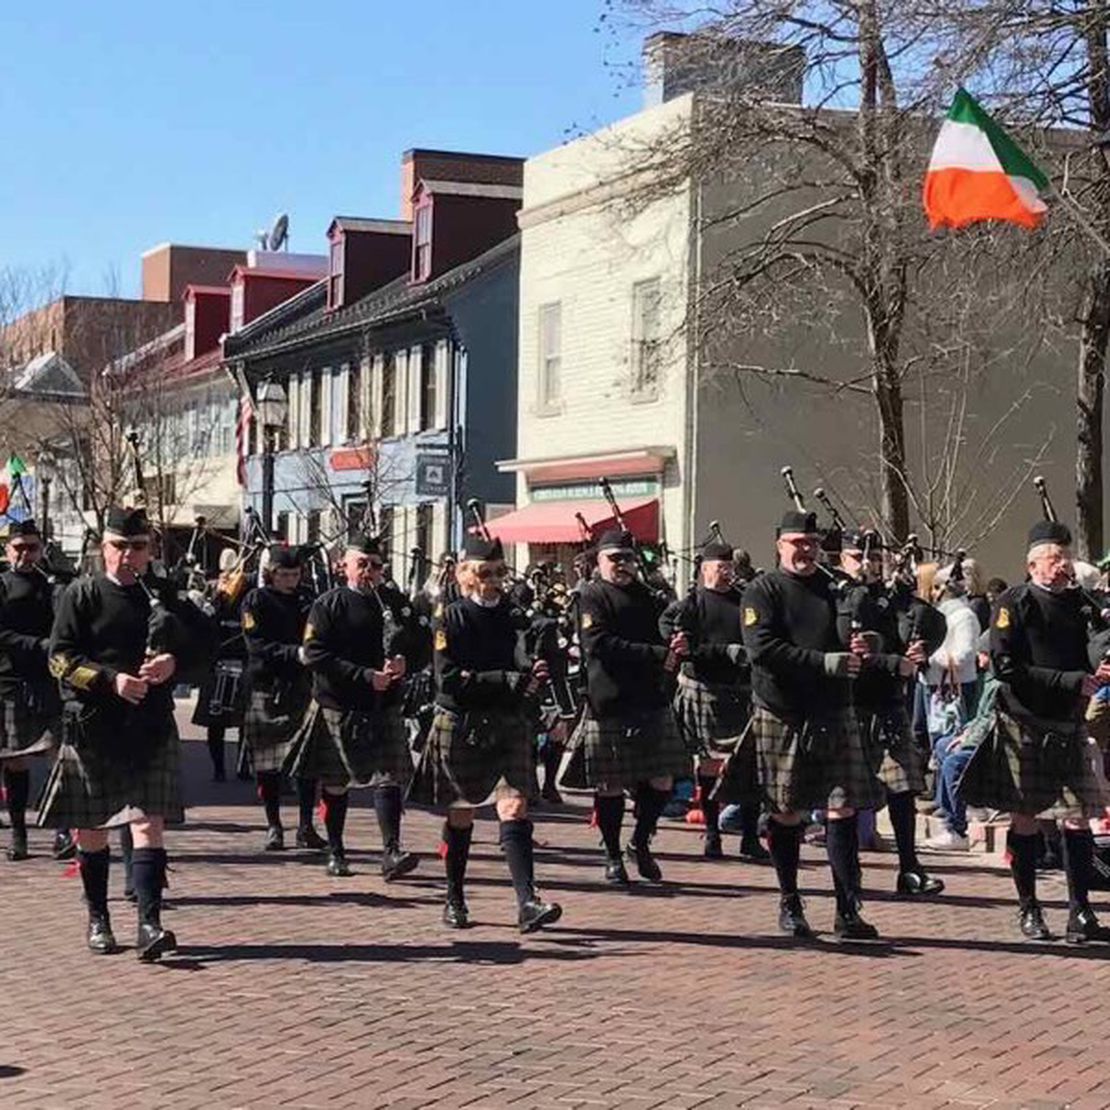 Chesapeake Caledonian Pipes & Drums